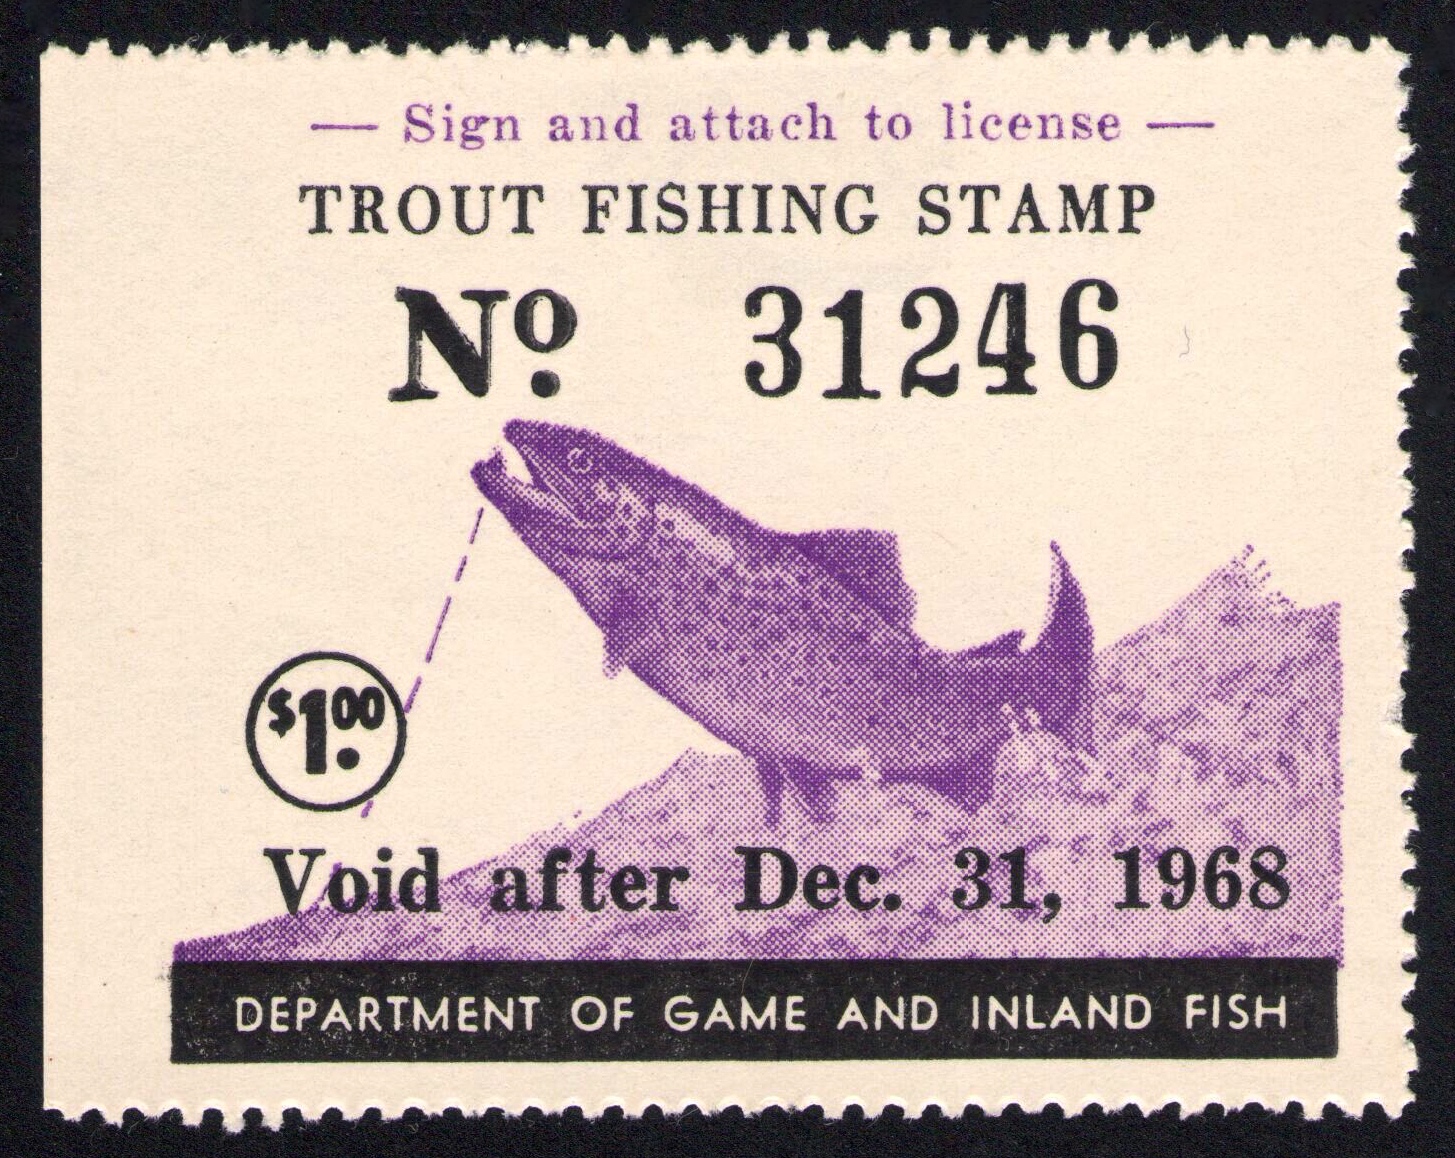 1969 Non-resident 5 dollar trout stamp New Jersey